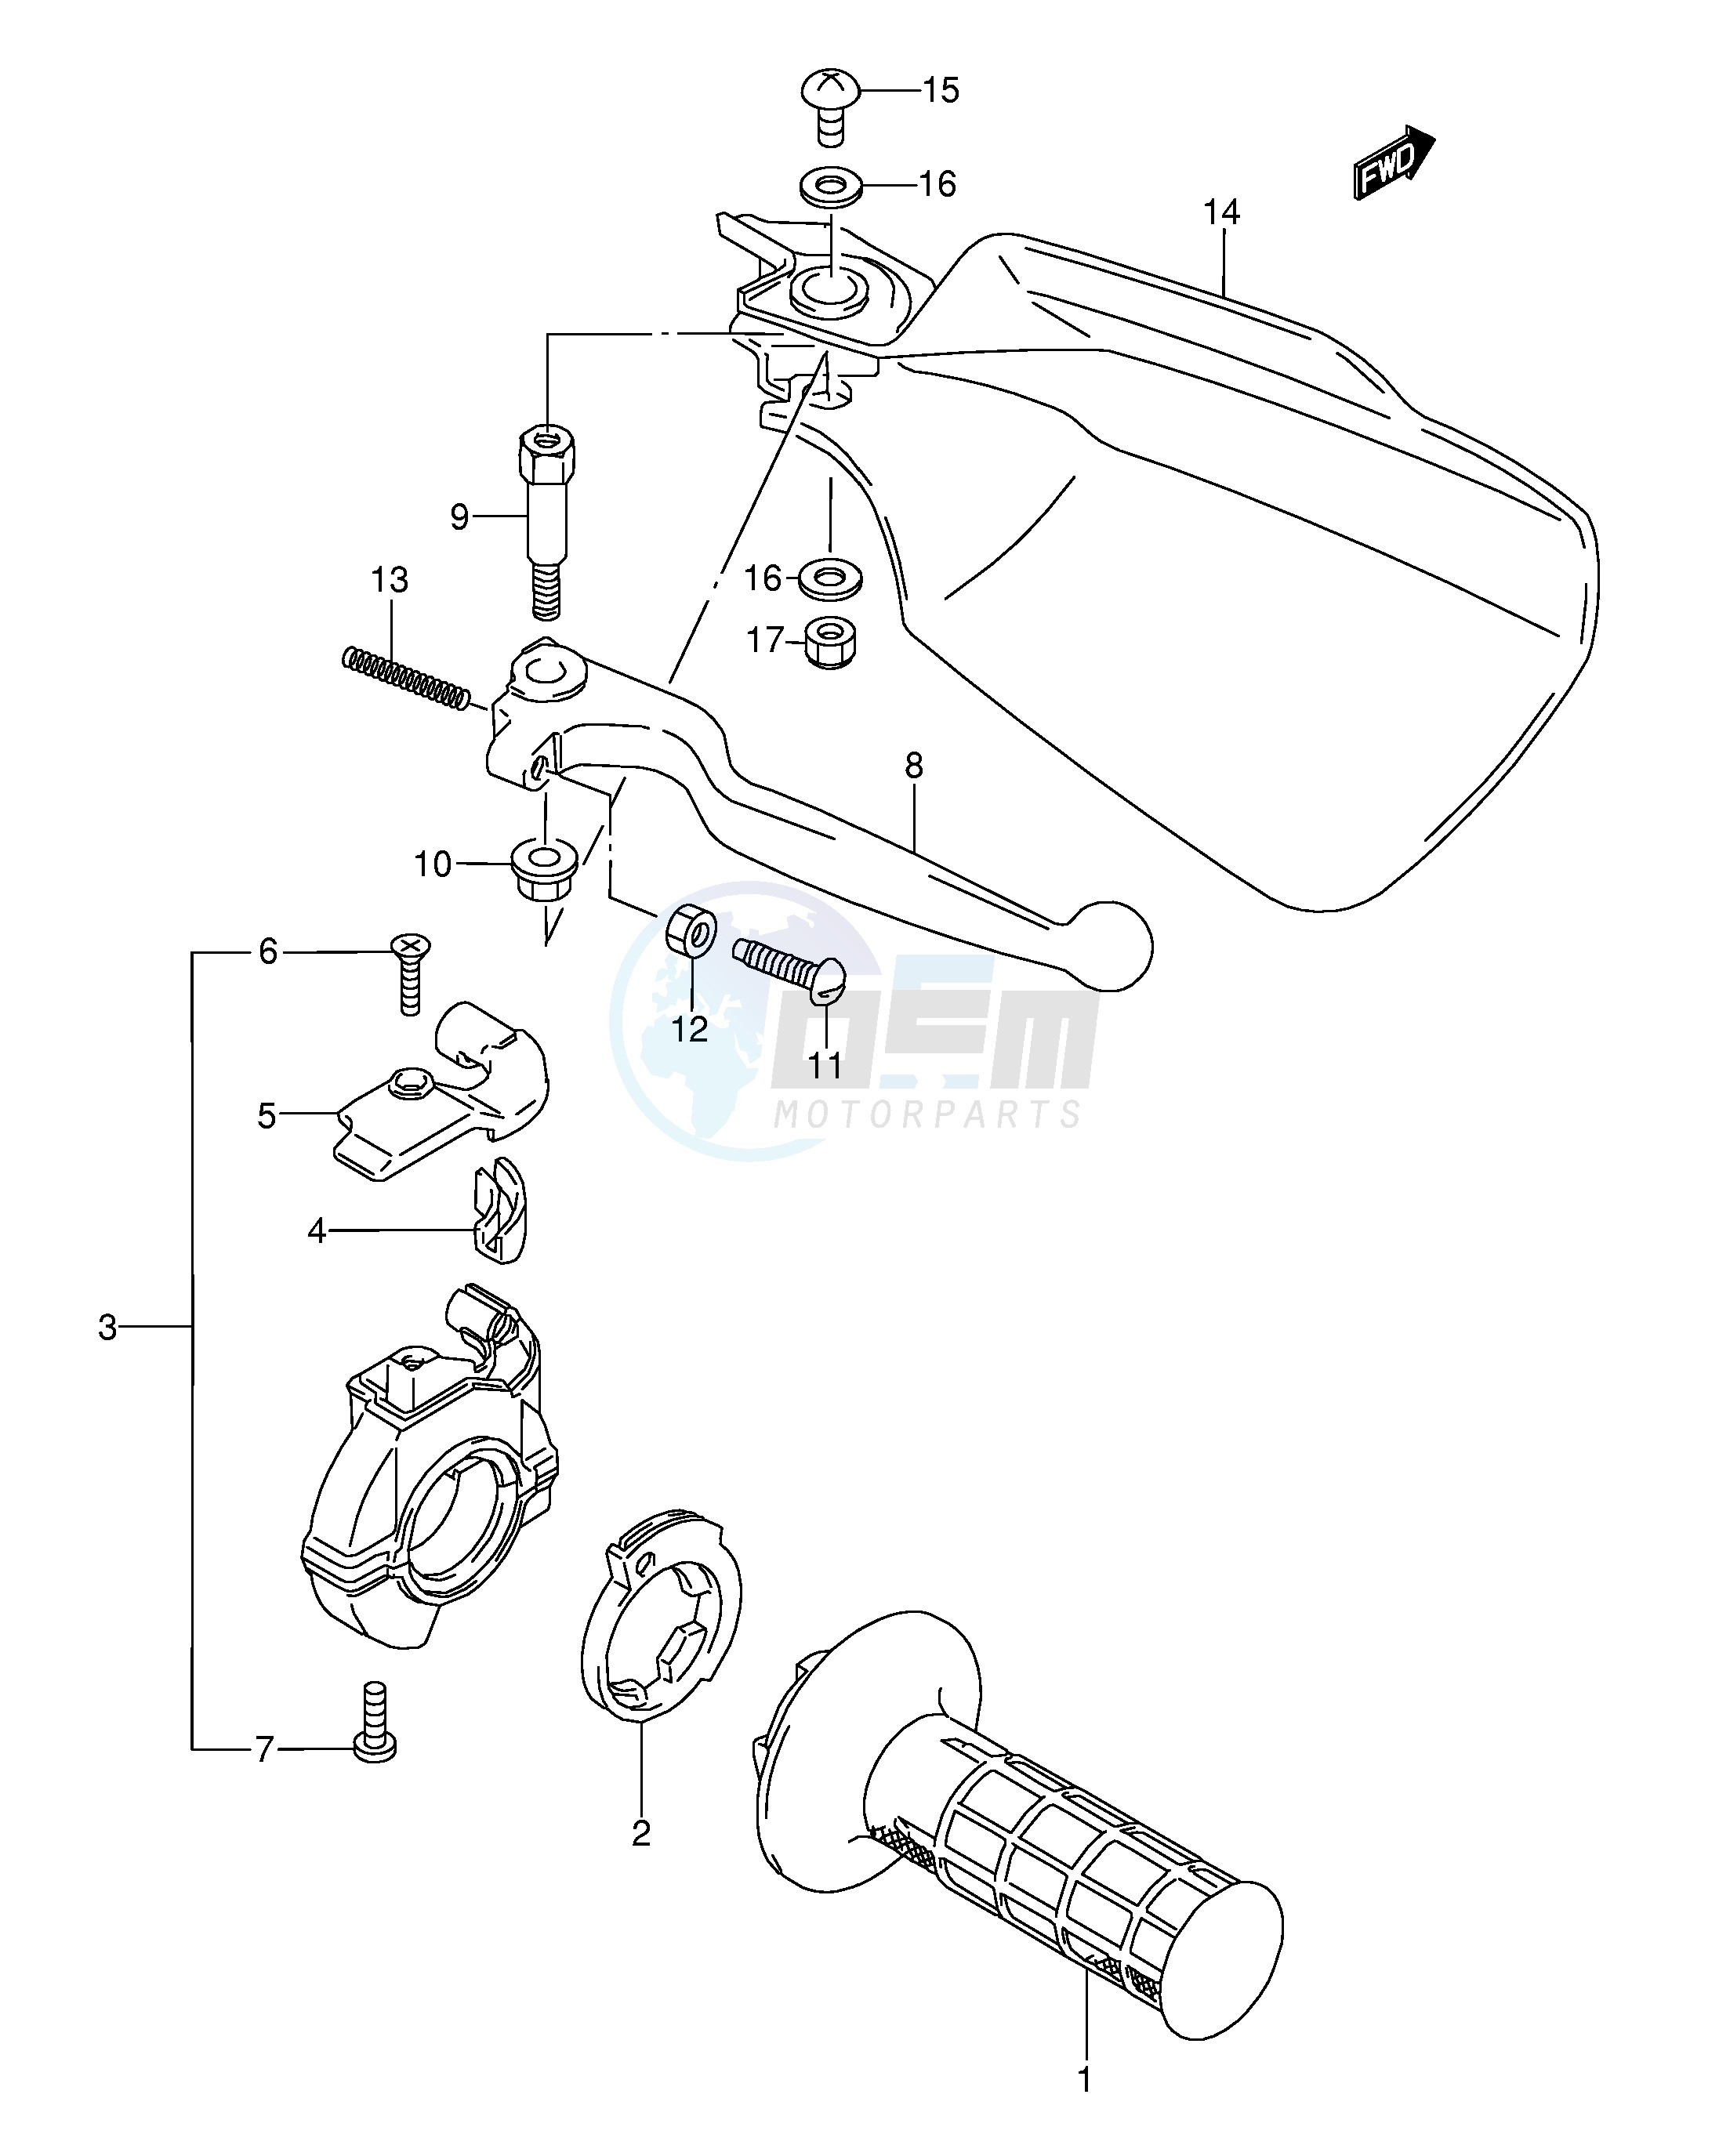 RIGHT KNUCKLE COVER (MODEL K L M) blueprint